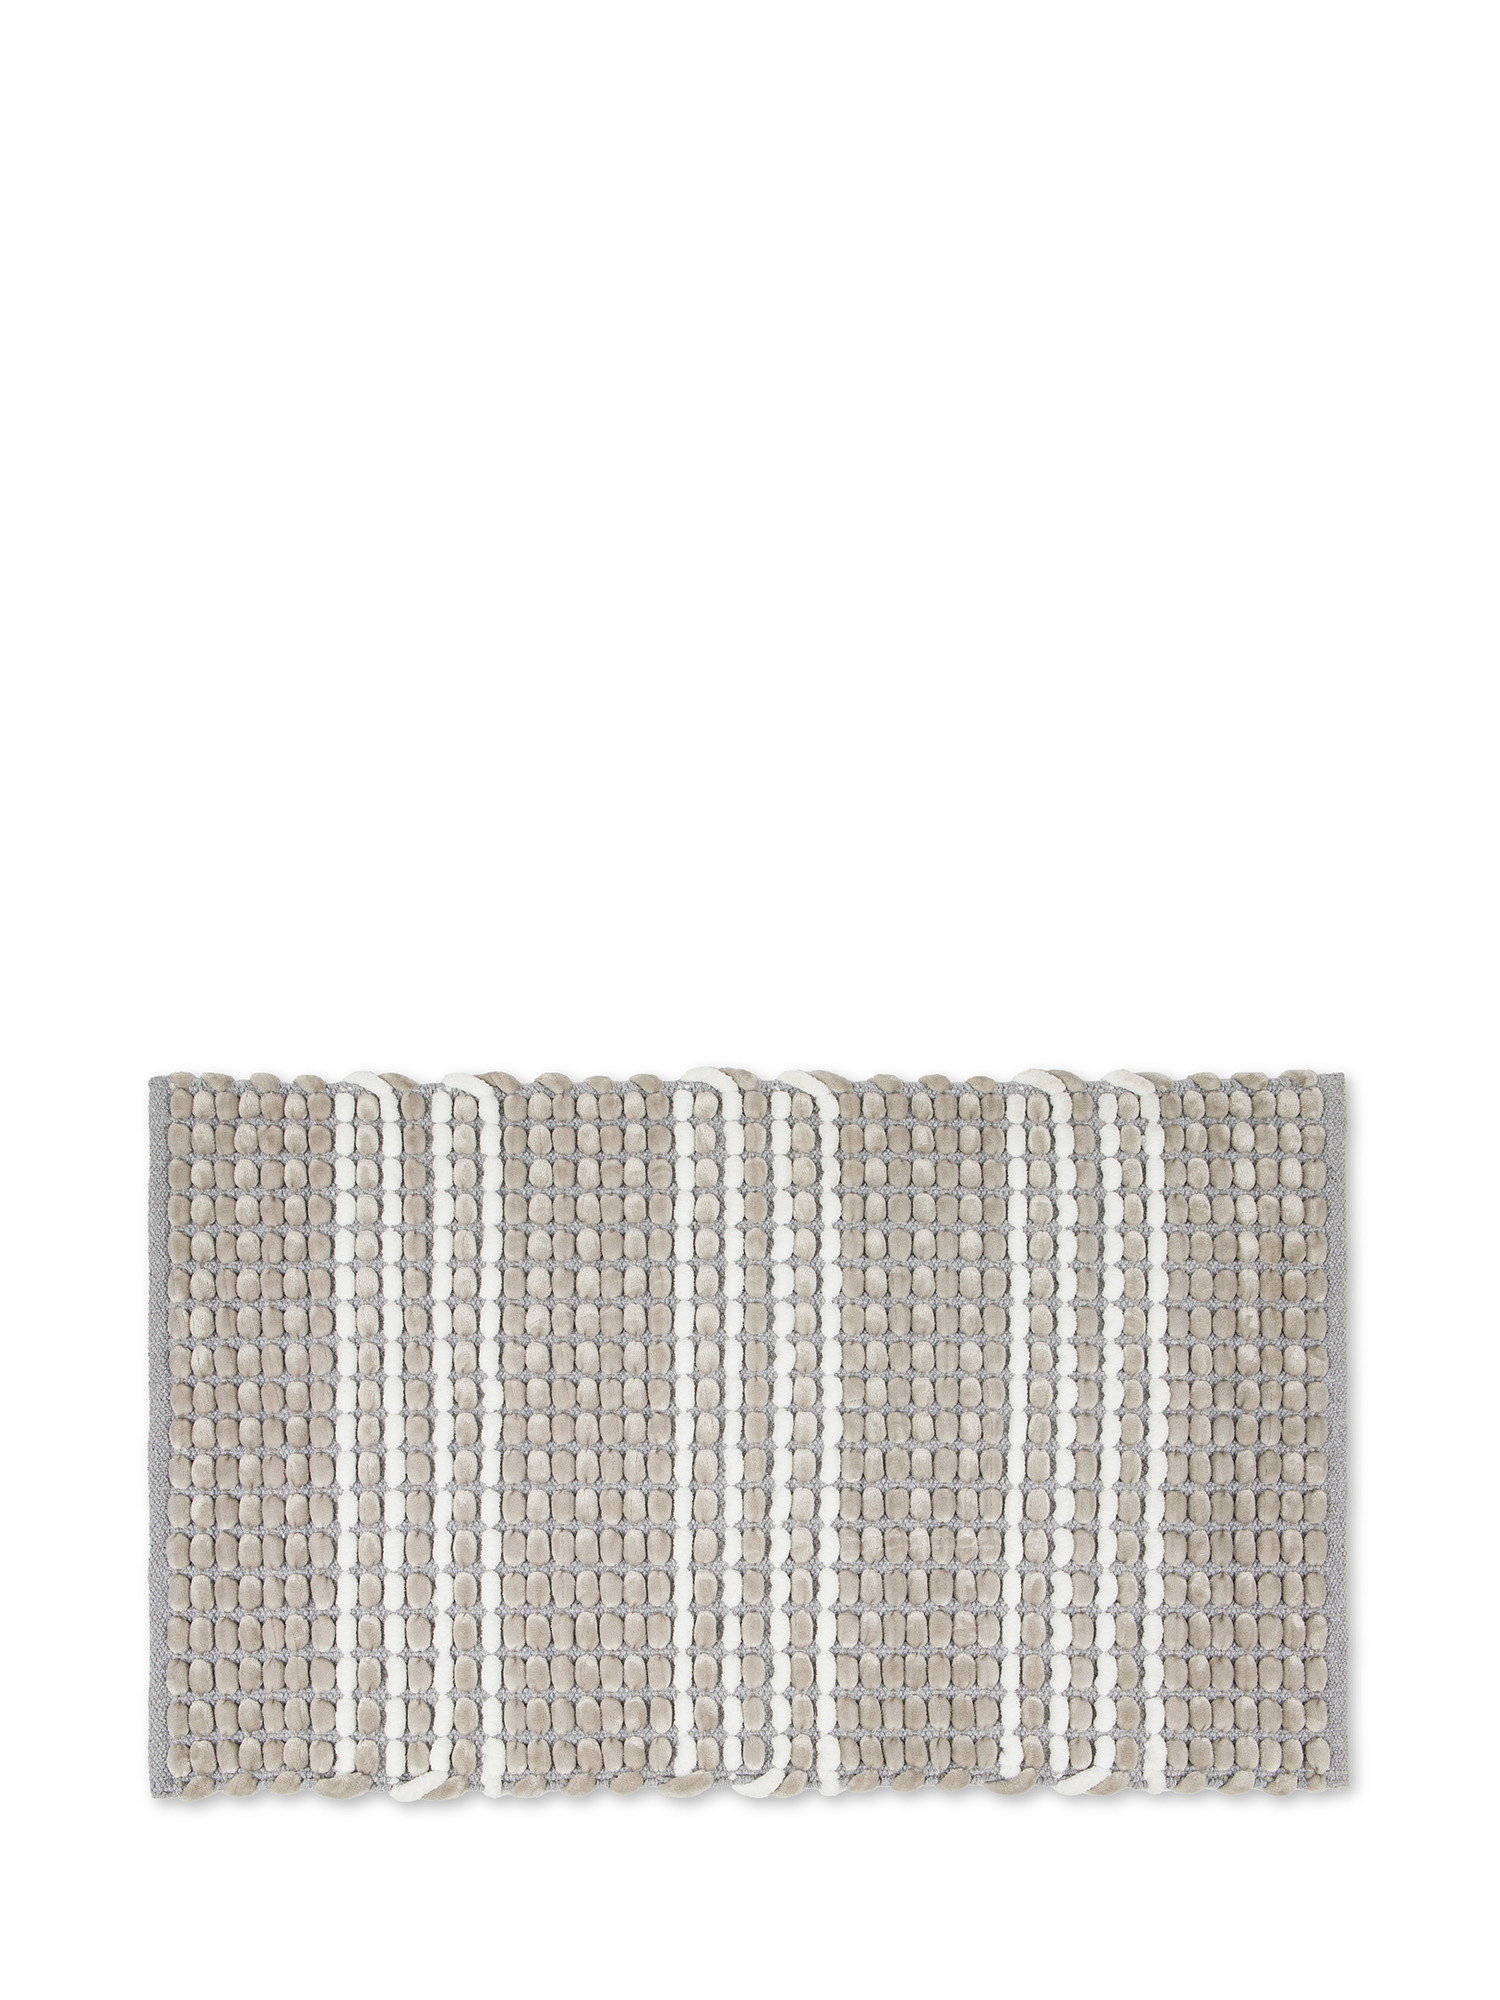 Woven-effect chenille bathroom rug, Silver Grey, large image number 0